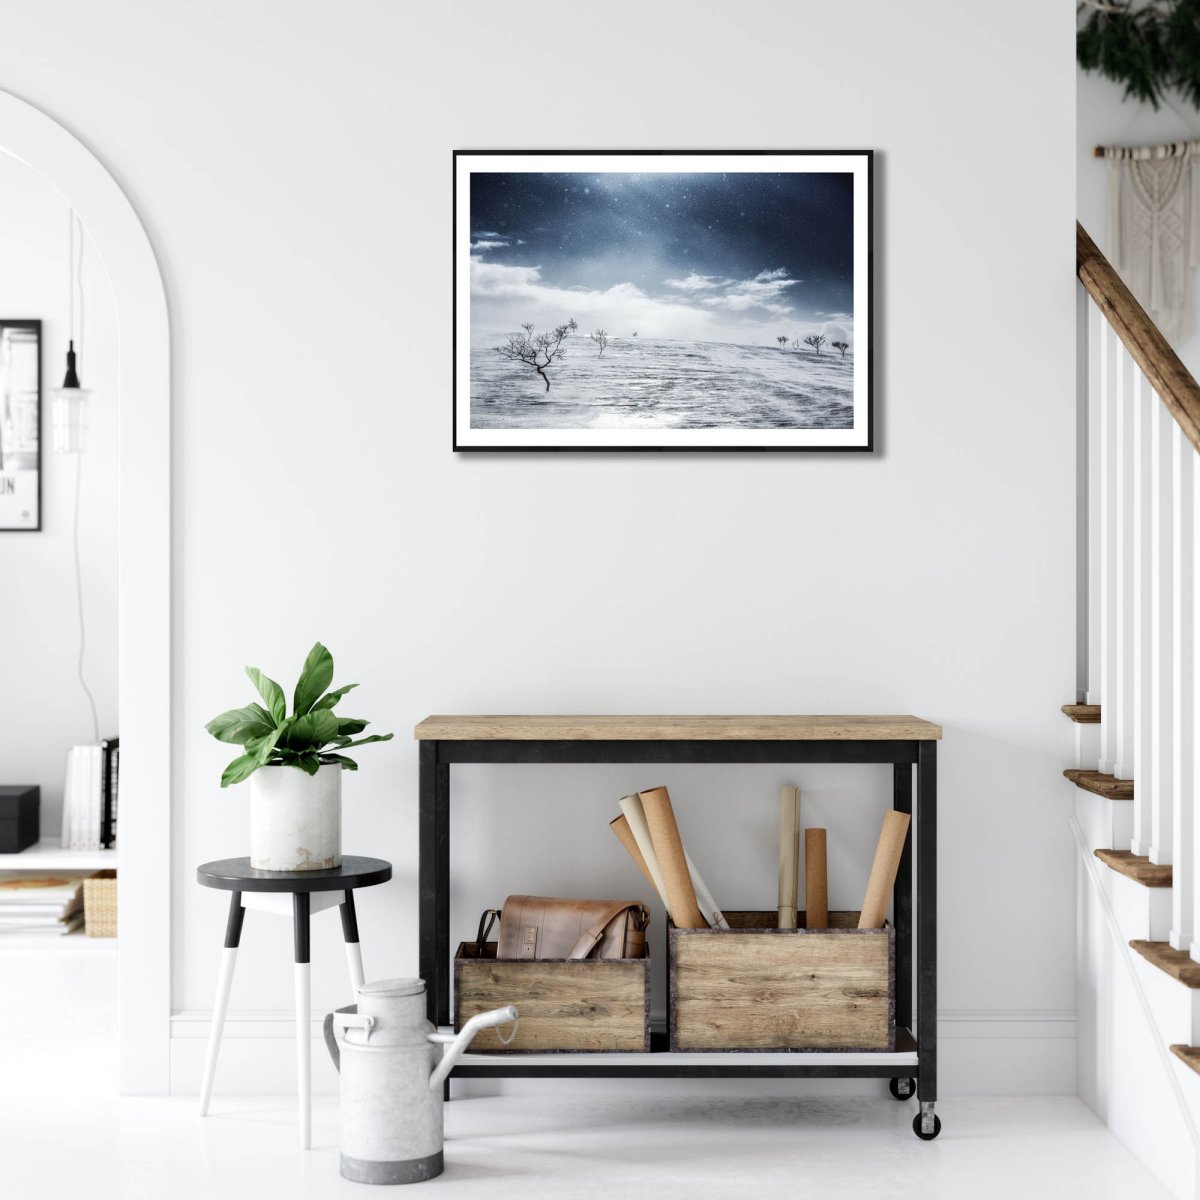 Framed Arctic wilderness photo, windswept snow, stark black mountain birches on snow, on white wall in living room.